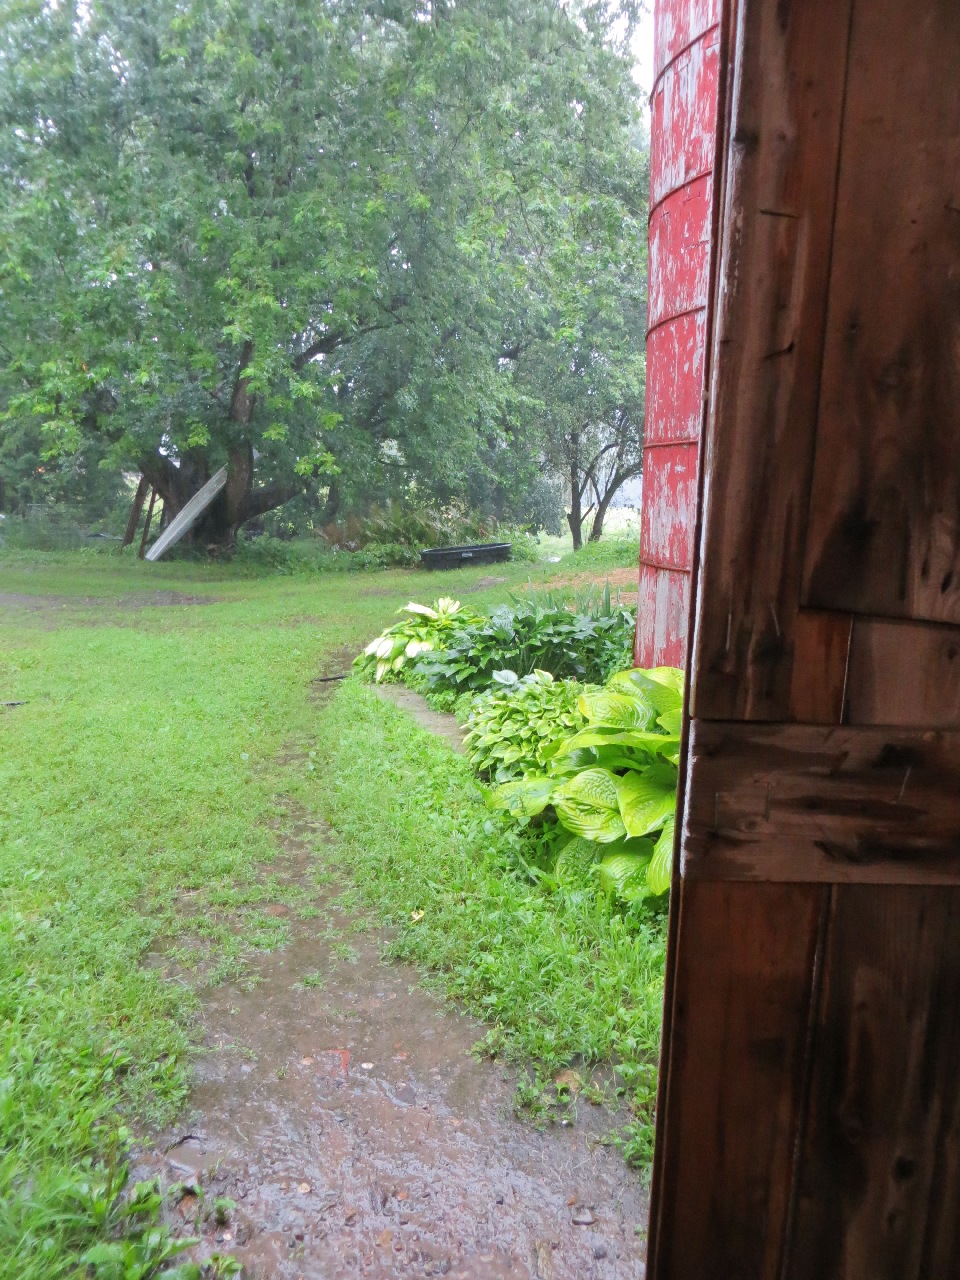 looking out at a rain-soaked dirt/gravel footpath through scrubby green plants growing in the driveway. On the right you're looking past the shed door and a round red wooden silo with hostas at its base. Straight ahead is a giant branching silver maple.